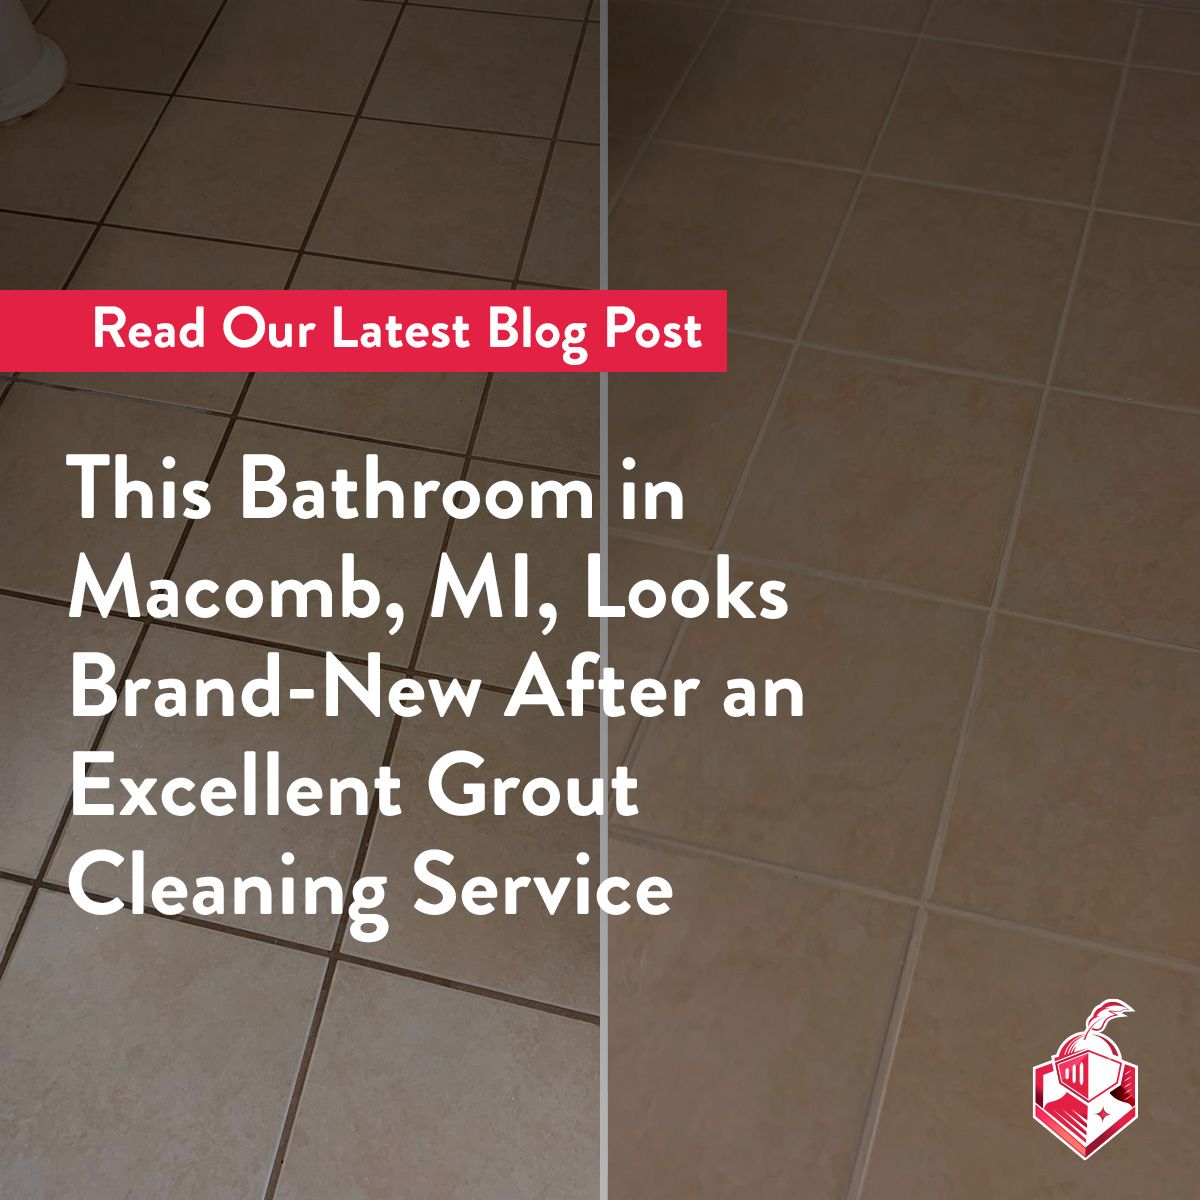 This Bathroom in Macomb, MI, Looks Brand-New After an Excellent Grout Cleaning Service